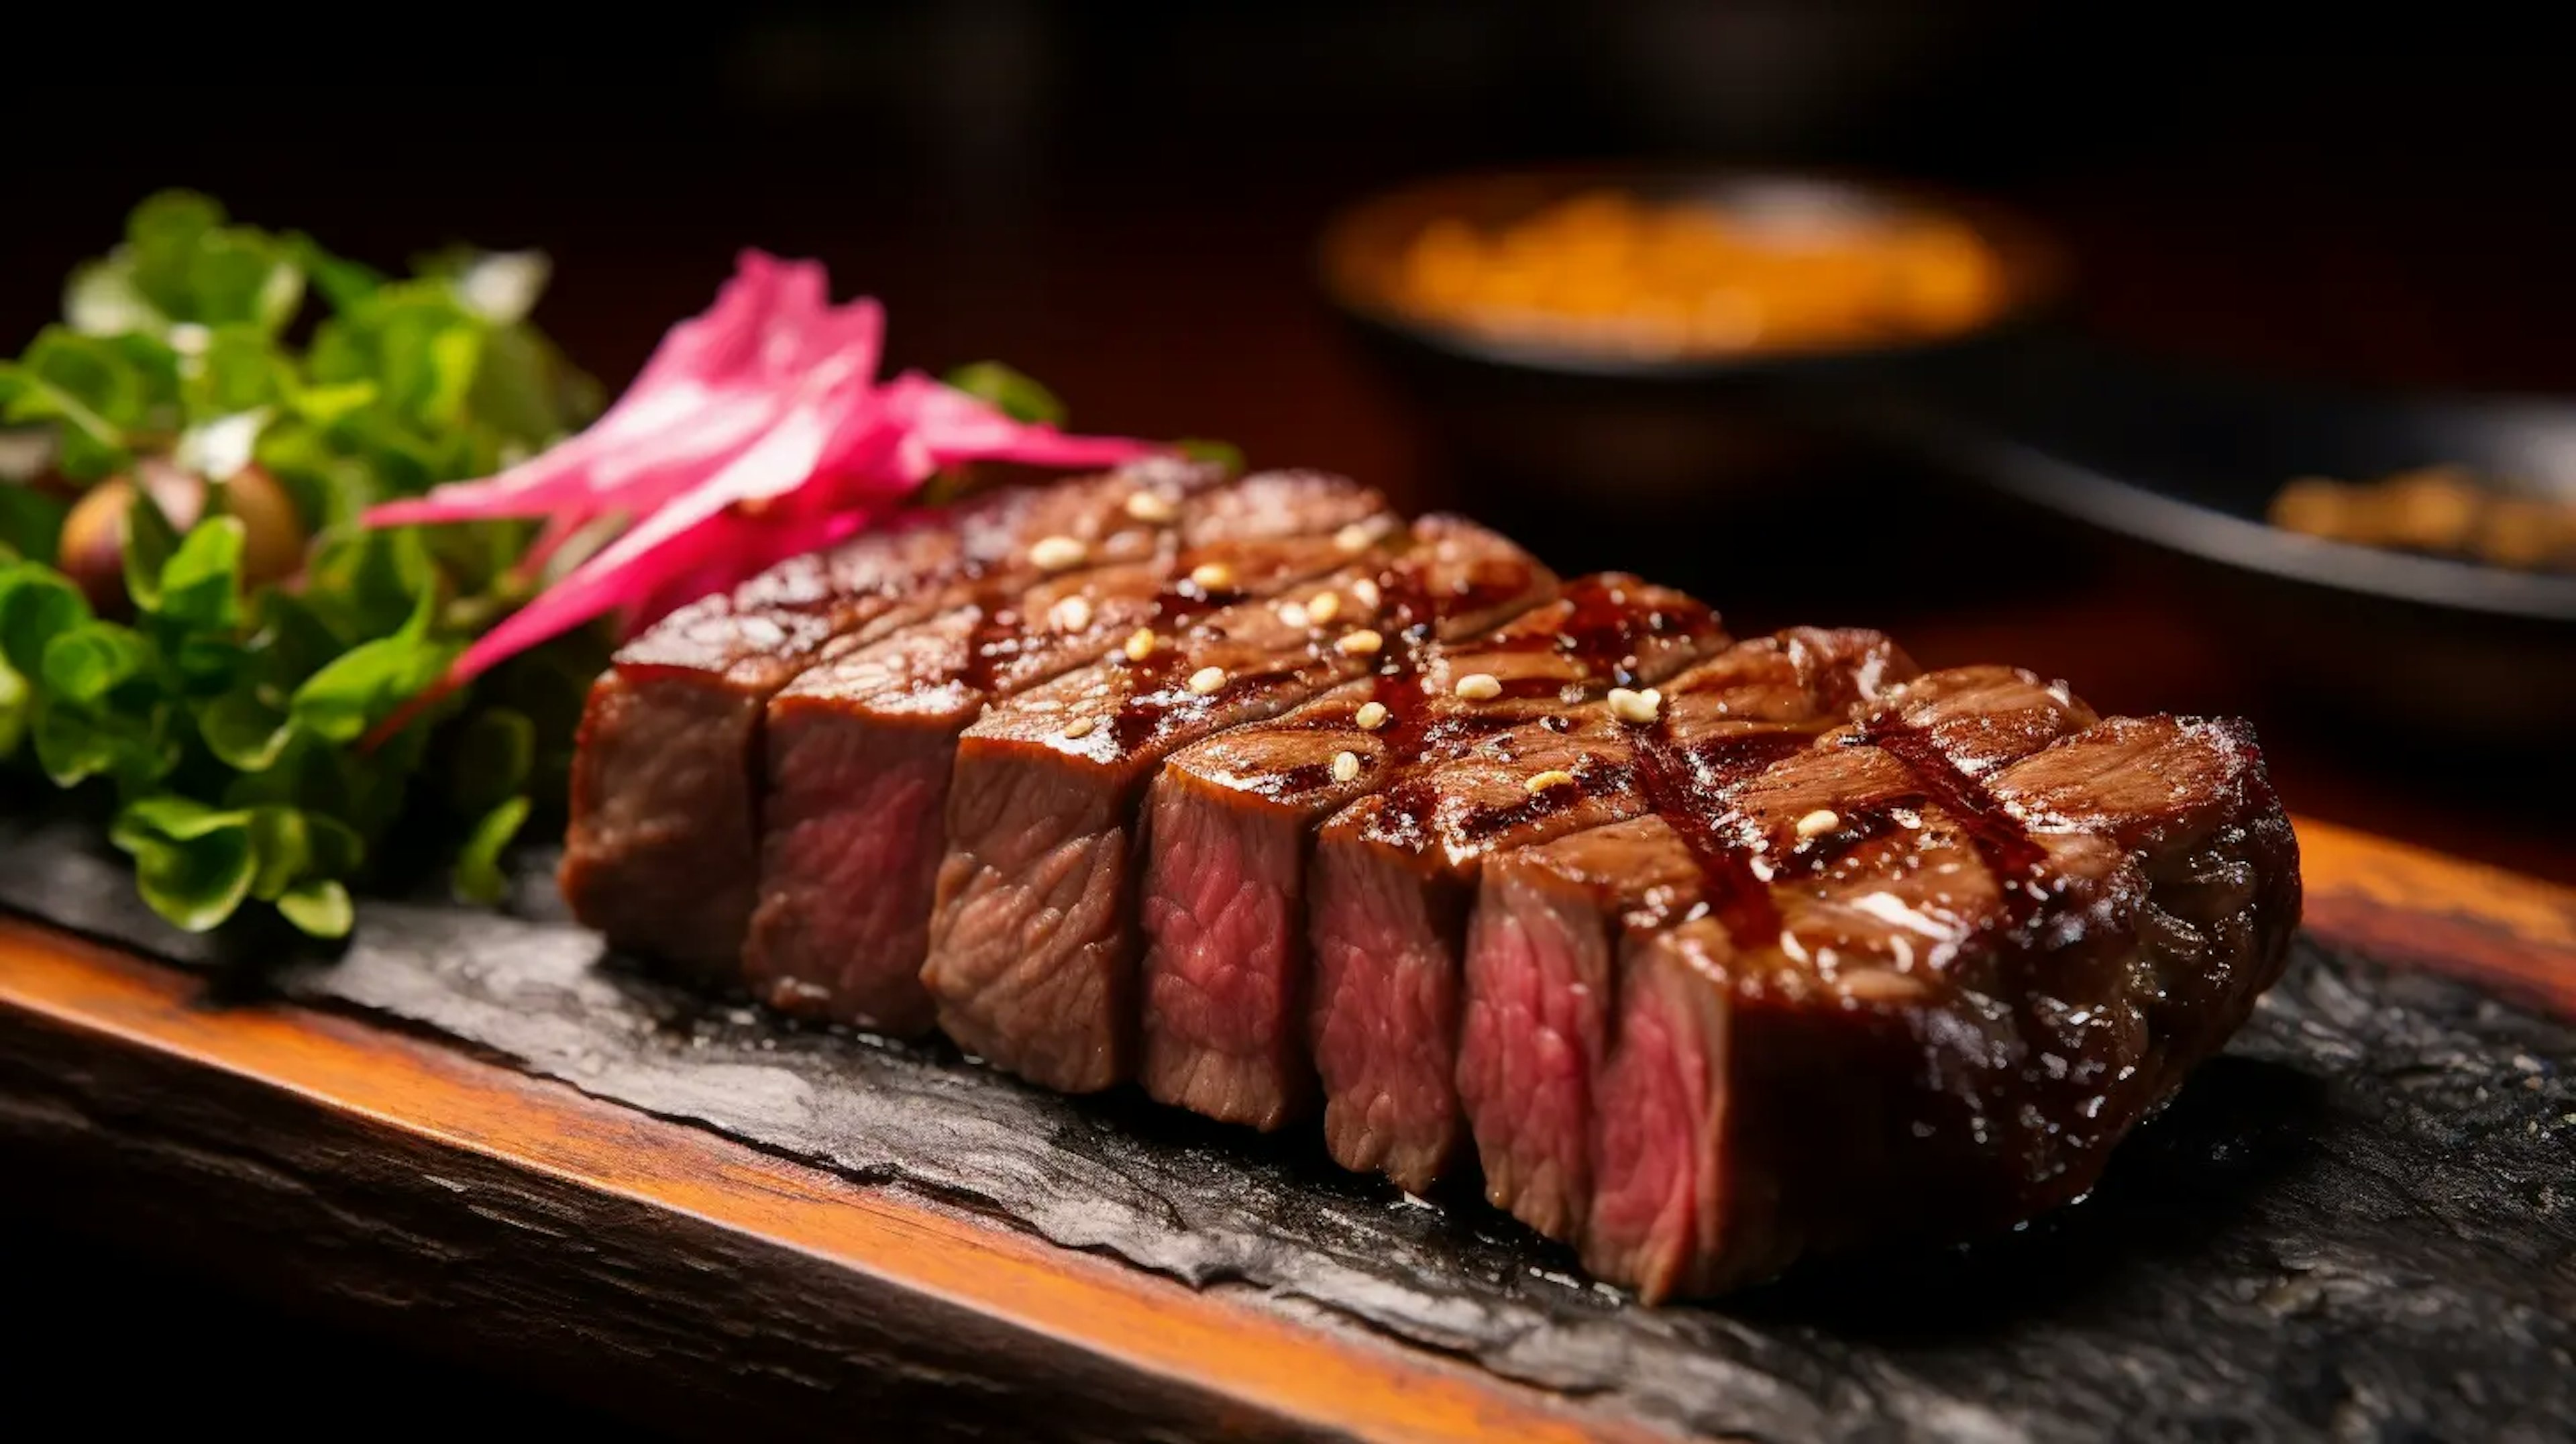 close-up of a perfectly grilled Kobe beef steak, showcasing its marbling and juicy texture